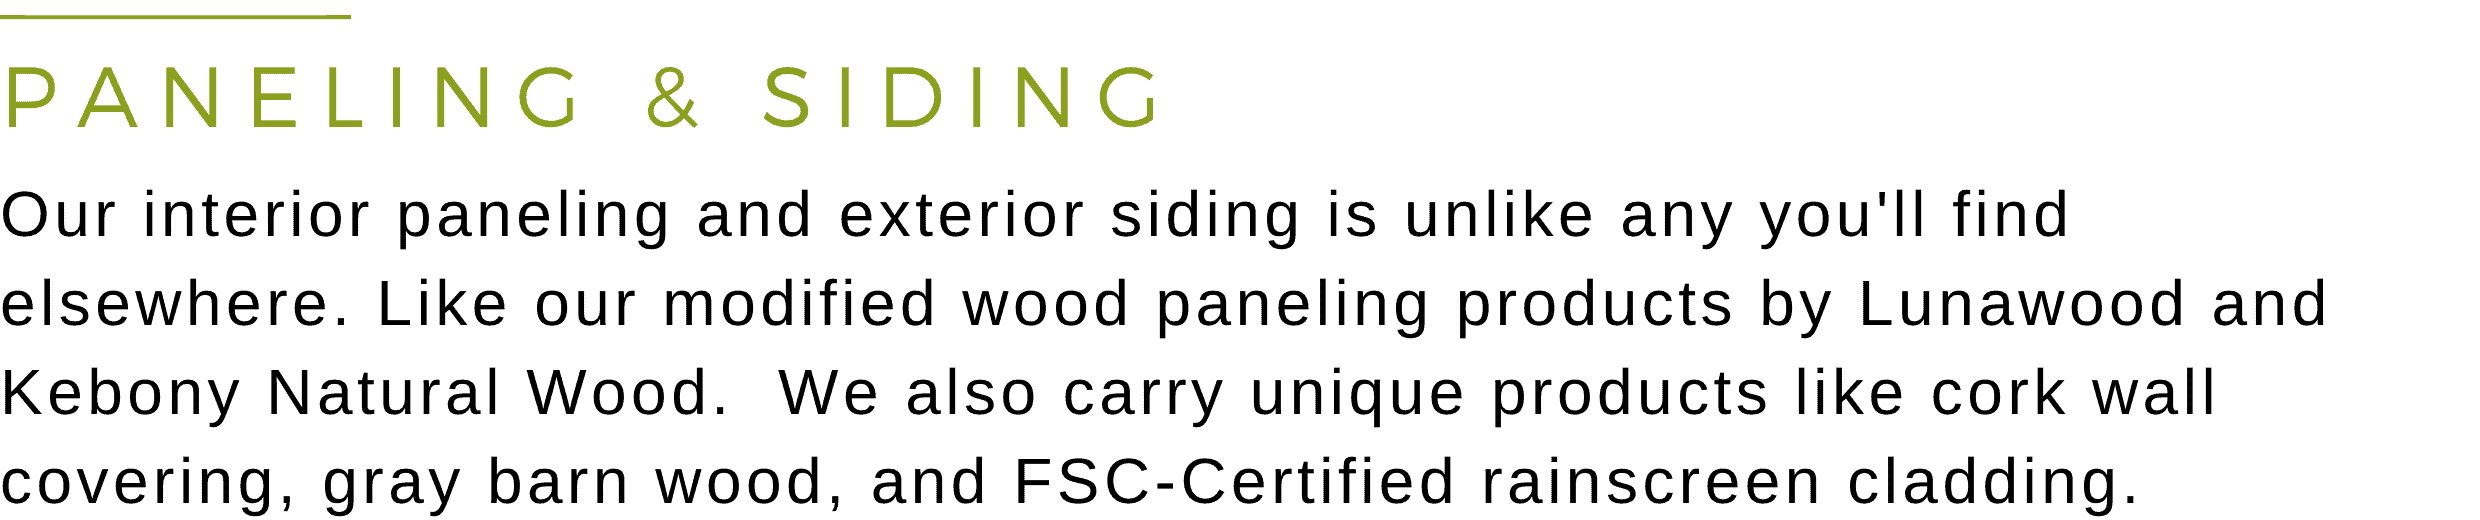 Our interior paneling and exterior siding is unlike any you'll find elsewhere. Like our exclusive 'Shou Sugi Ban' line - custom-made charred Doug Fir siding.  We also carry unique products like cork wall covering, reclaimed barn wood, FSC rainscreen, and prefab wood wall panels.